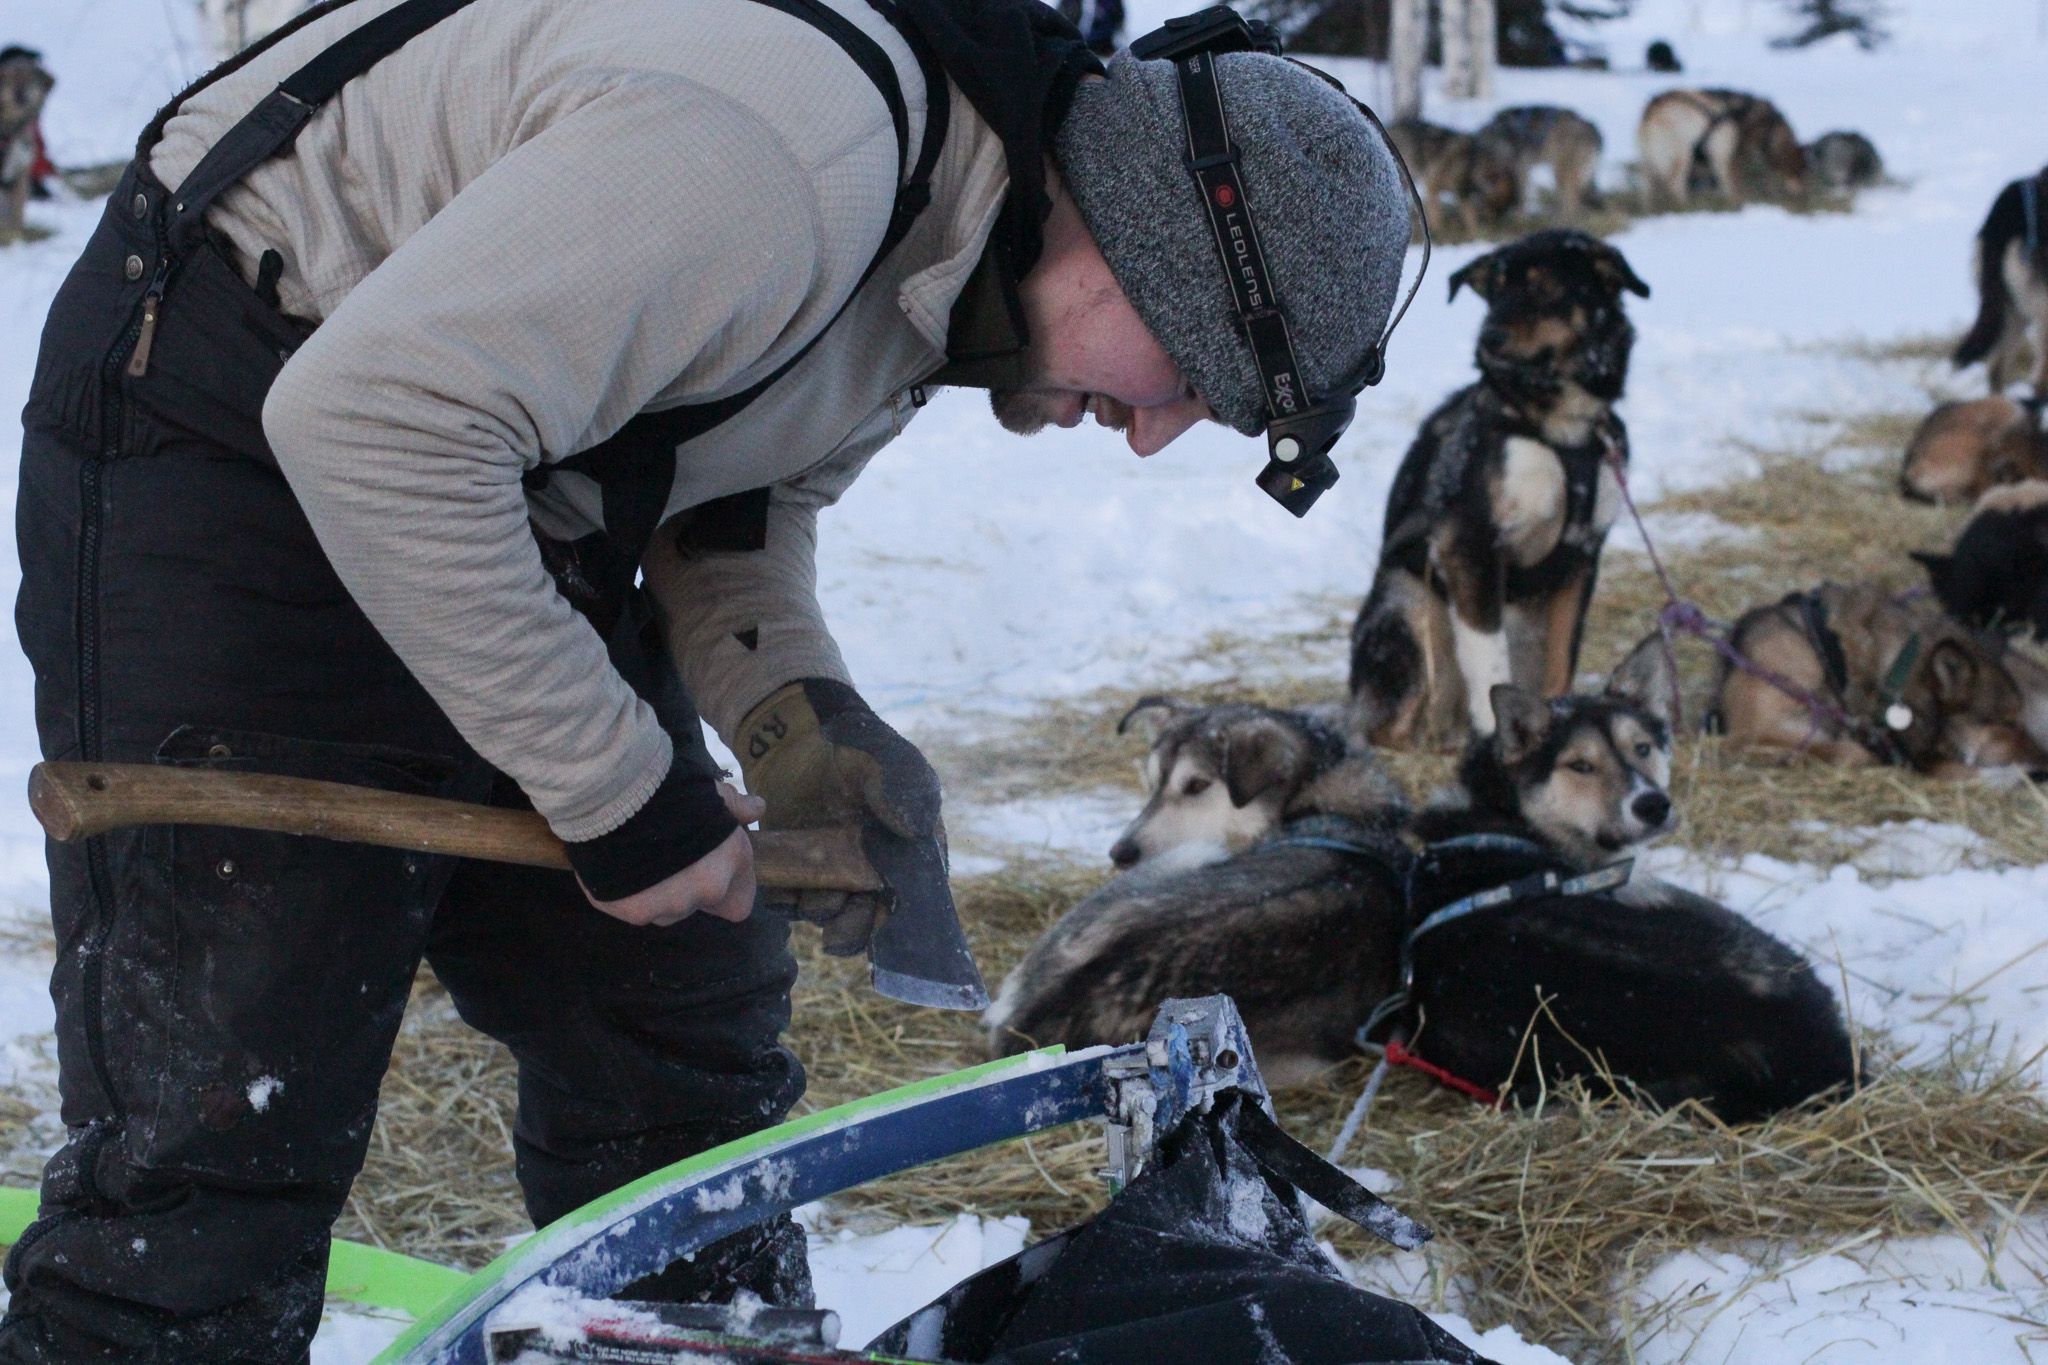 A musher scrapes sled runners with an ax